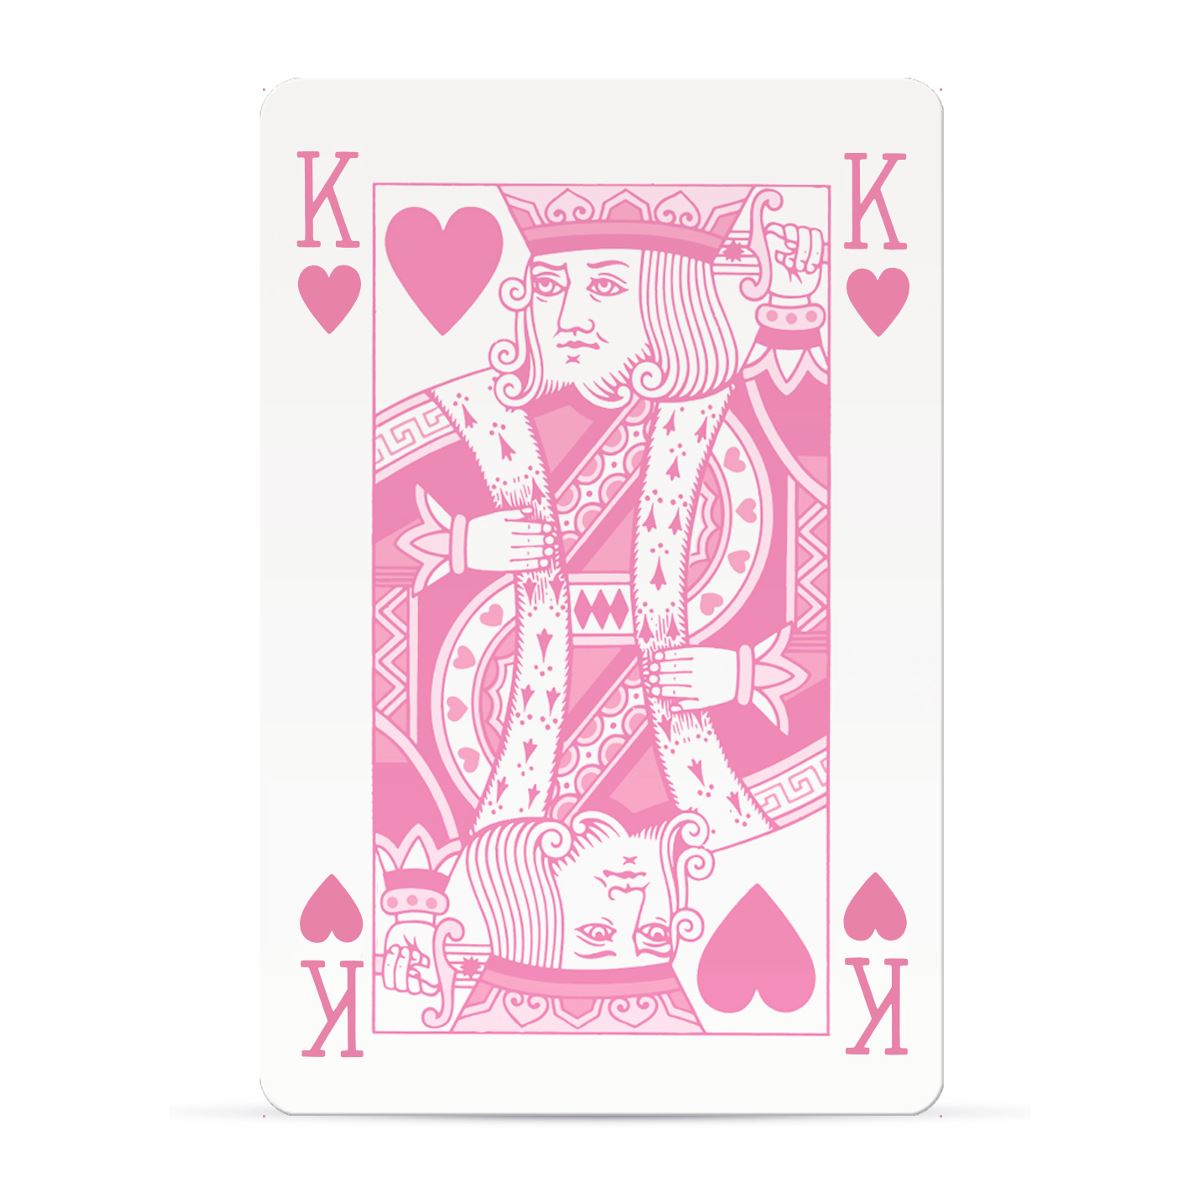 Classic Pink Waddingtons Number 1 Playing Cards